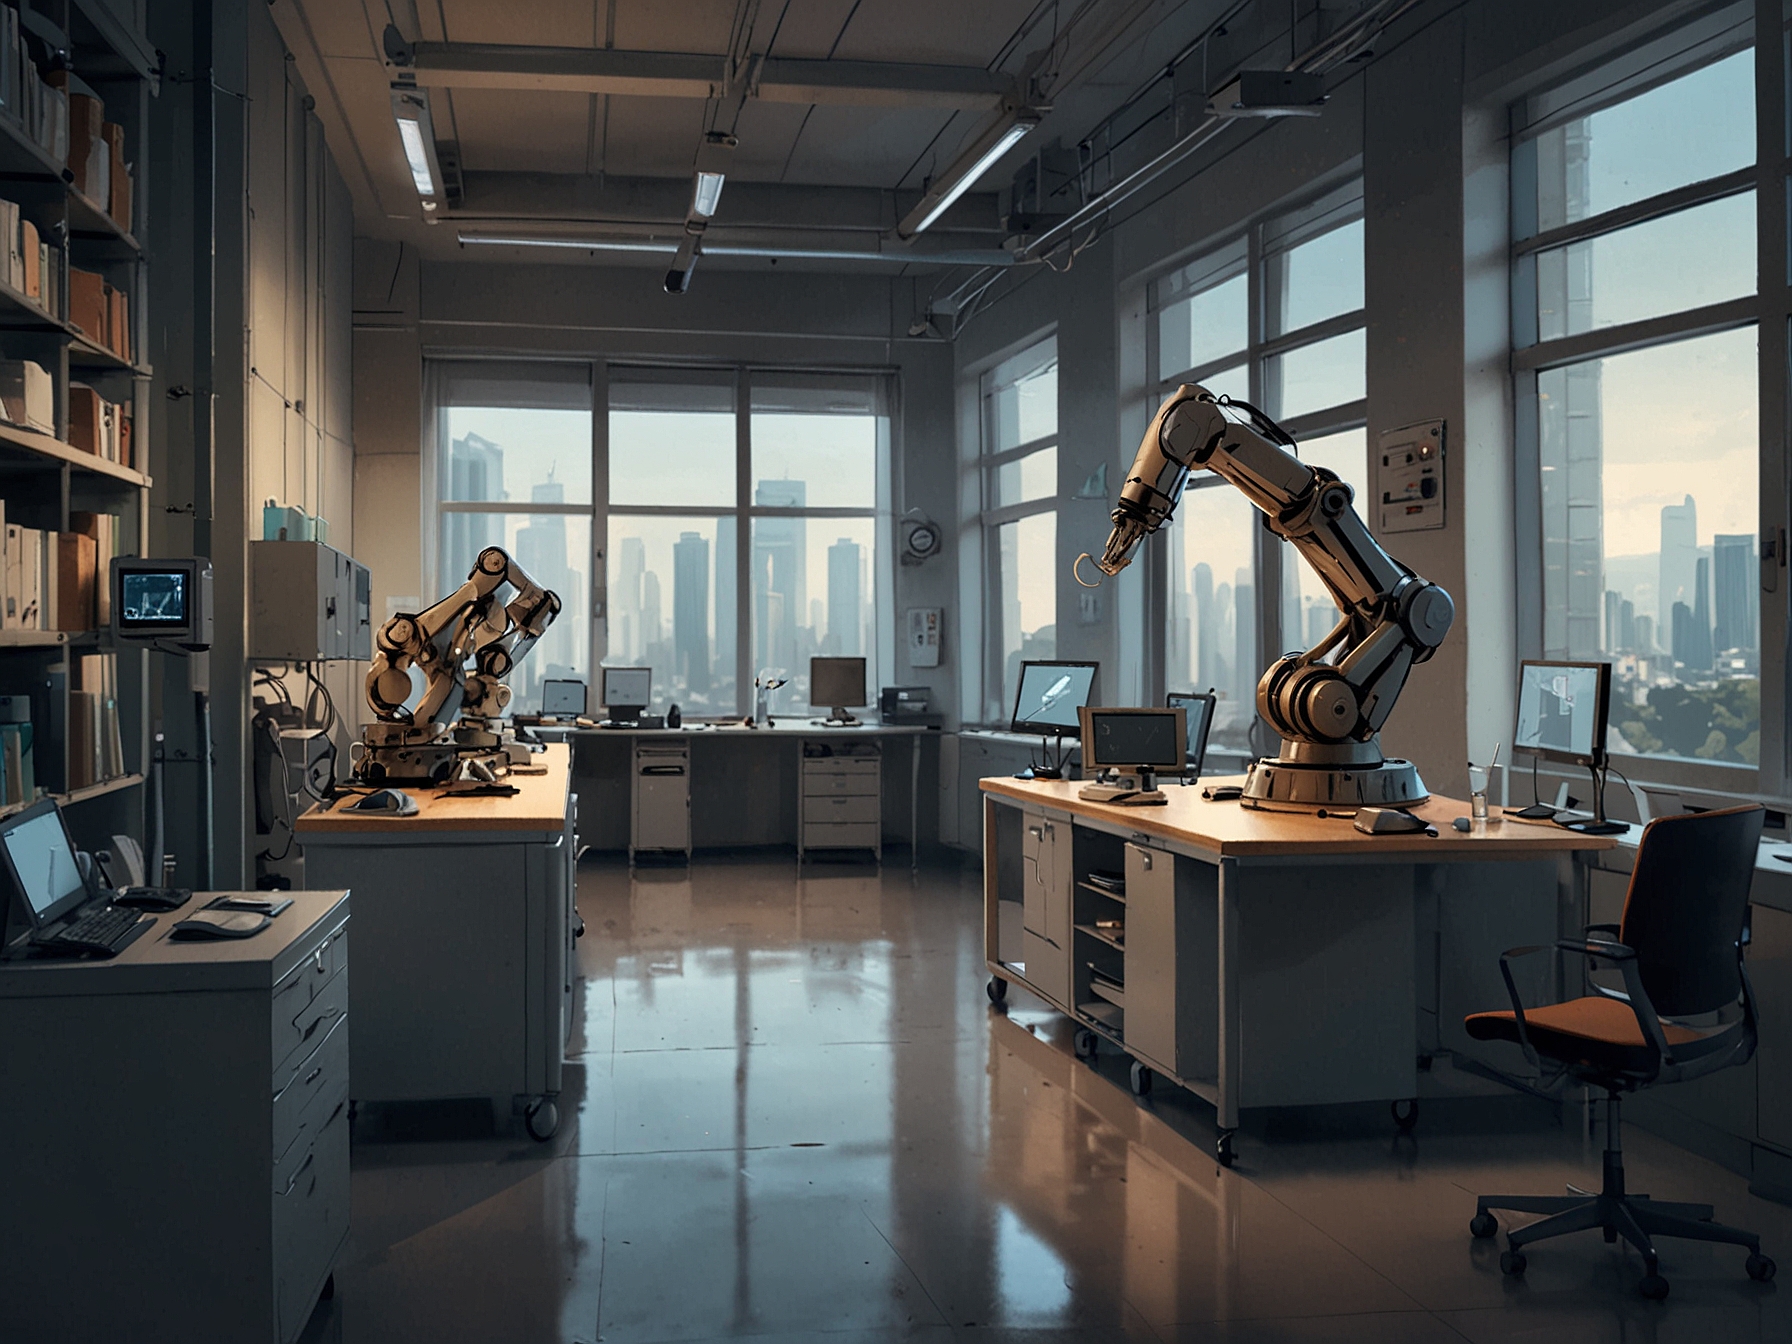 A sleek, modern robotic laboratory representing Pudu Robotics' state-of-the-art Global R&D Center in Hong Kong SAR, showcasing advanced technological equipment and research activities.